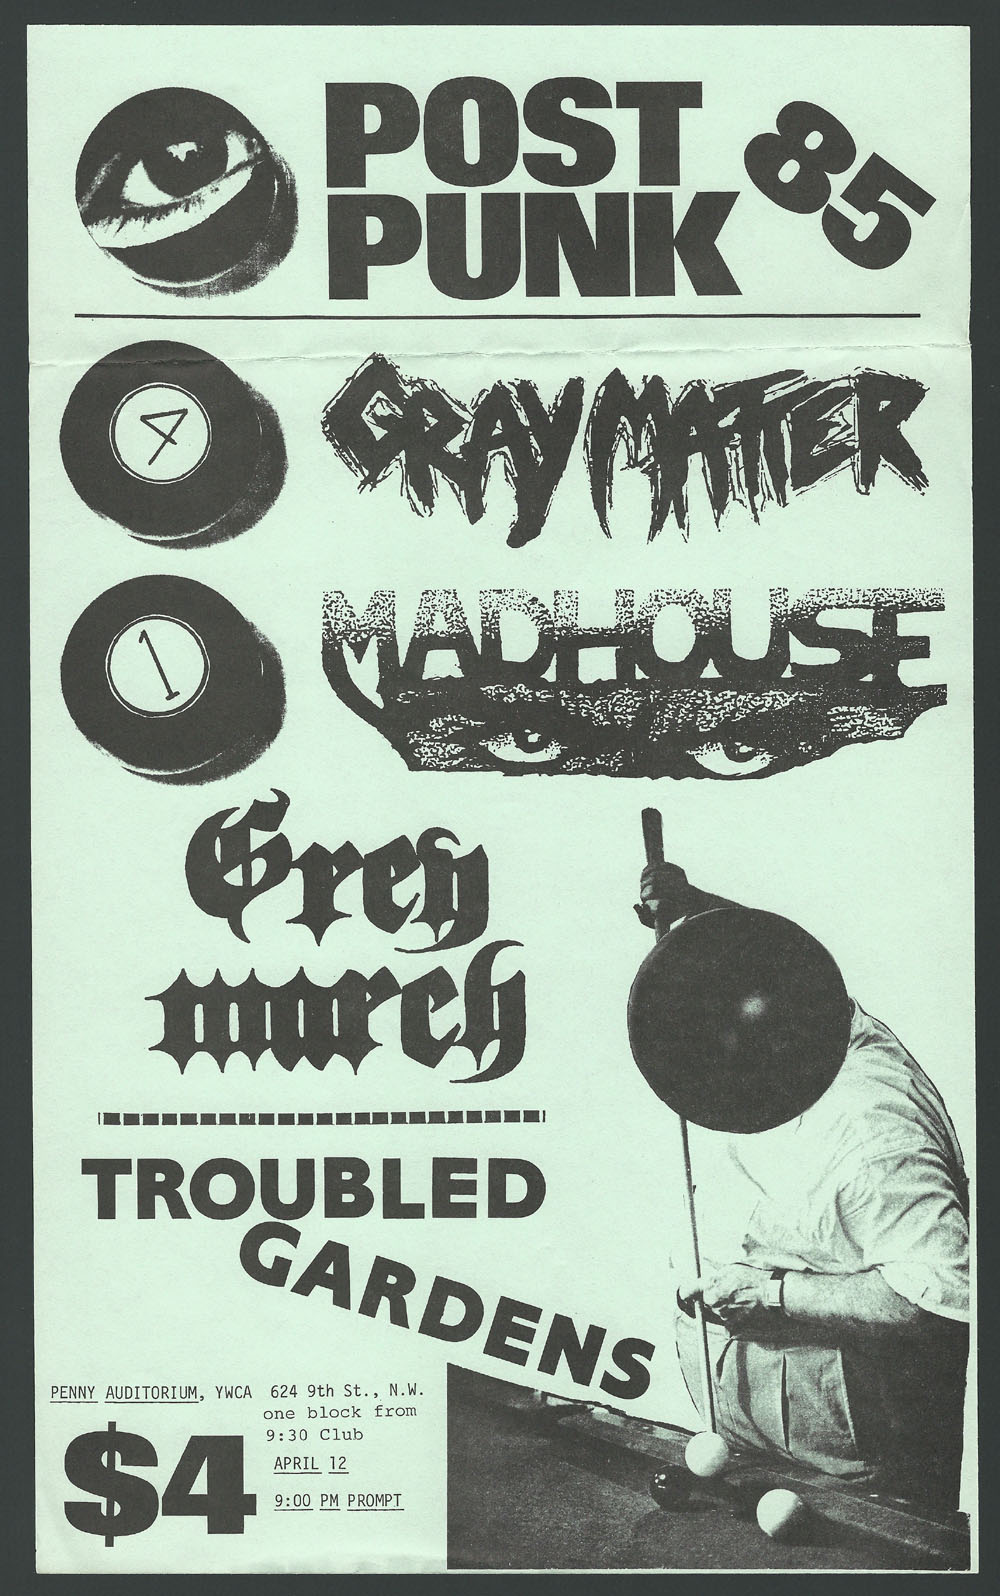 GRAY MATTER w/ Madhouse, Grey March, Troubled Gardens at YWCA